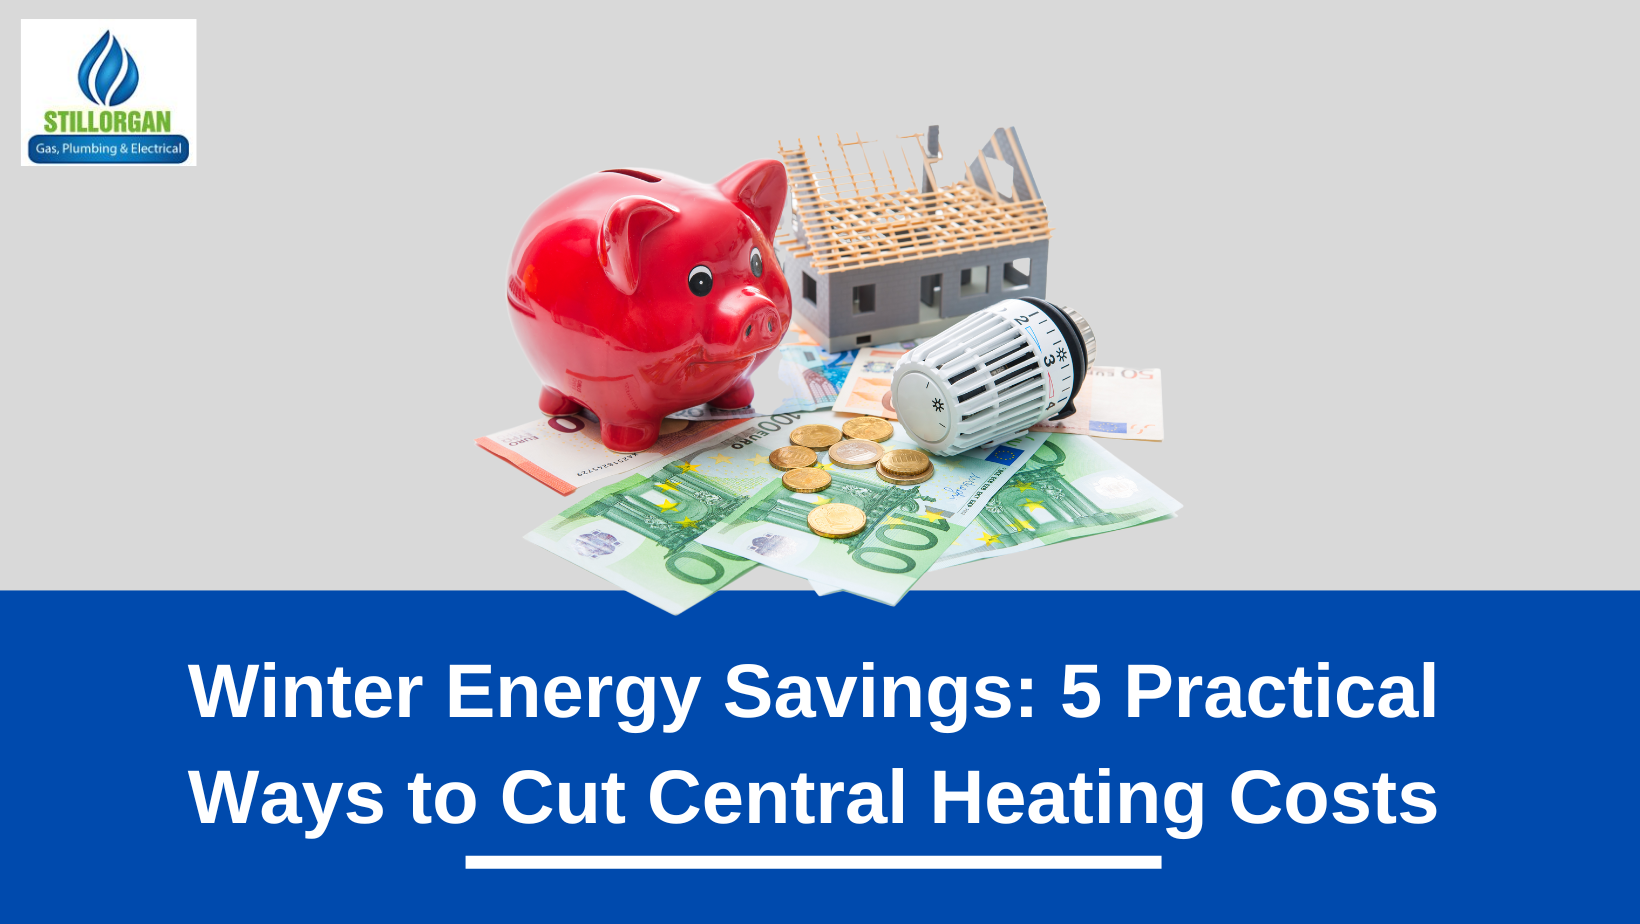 Winter Energy Savings: 5 Practical Ways to Cut Central Heating Costs